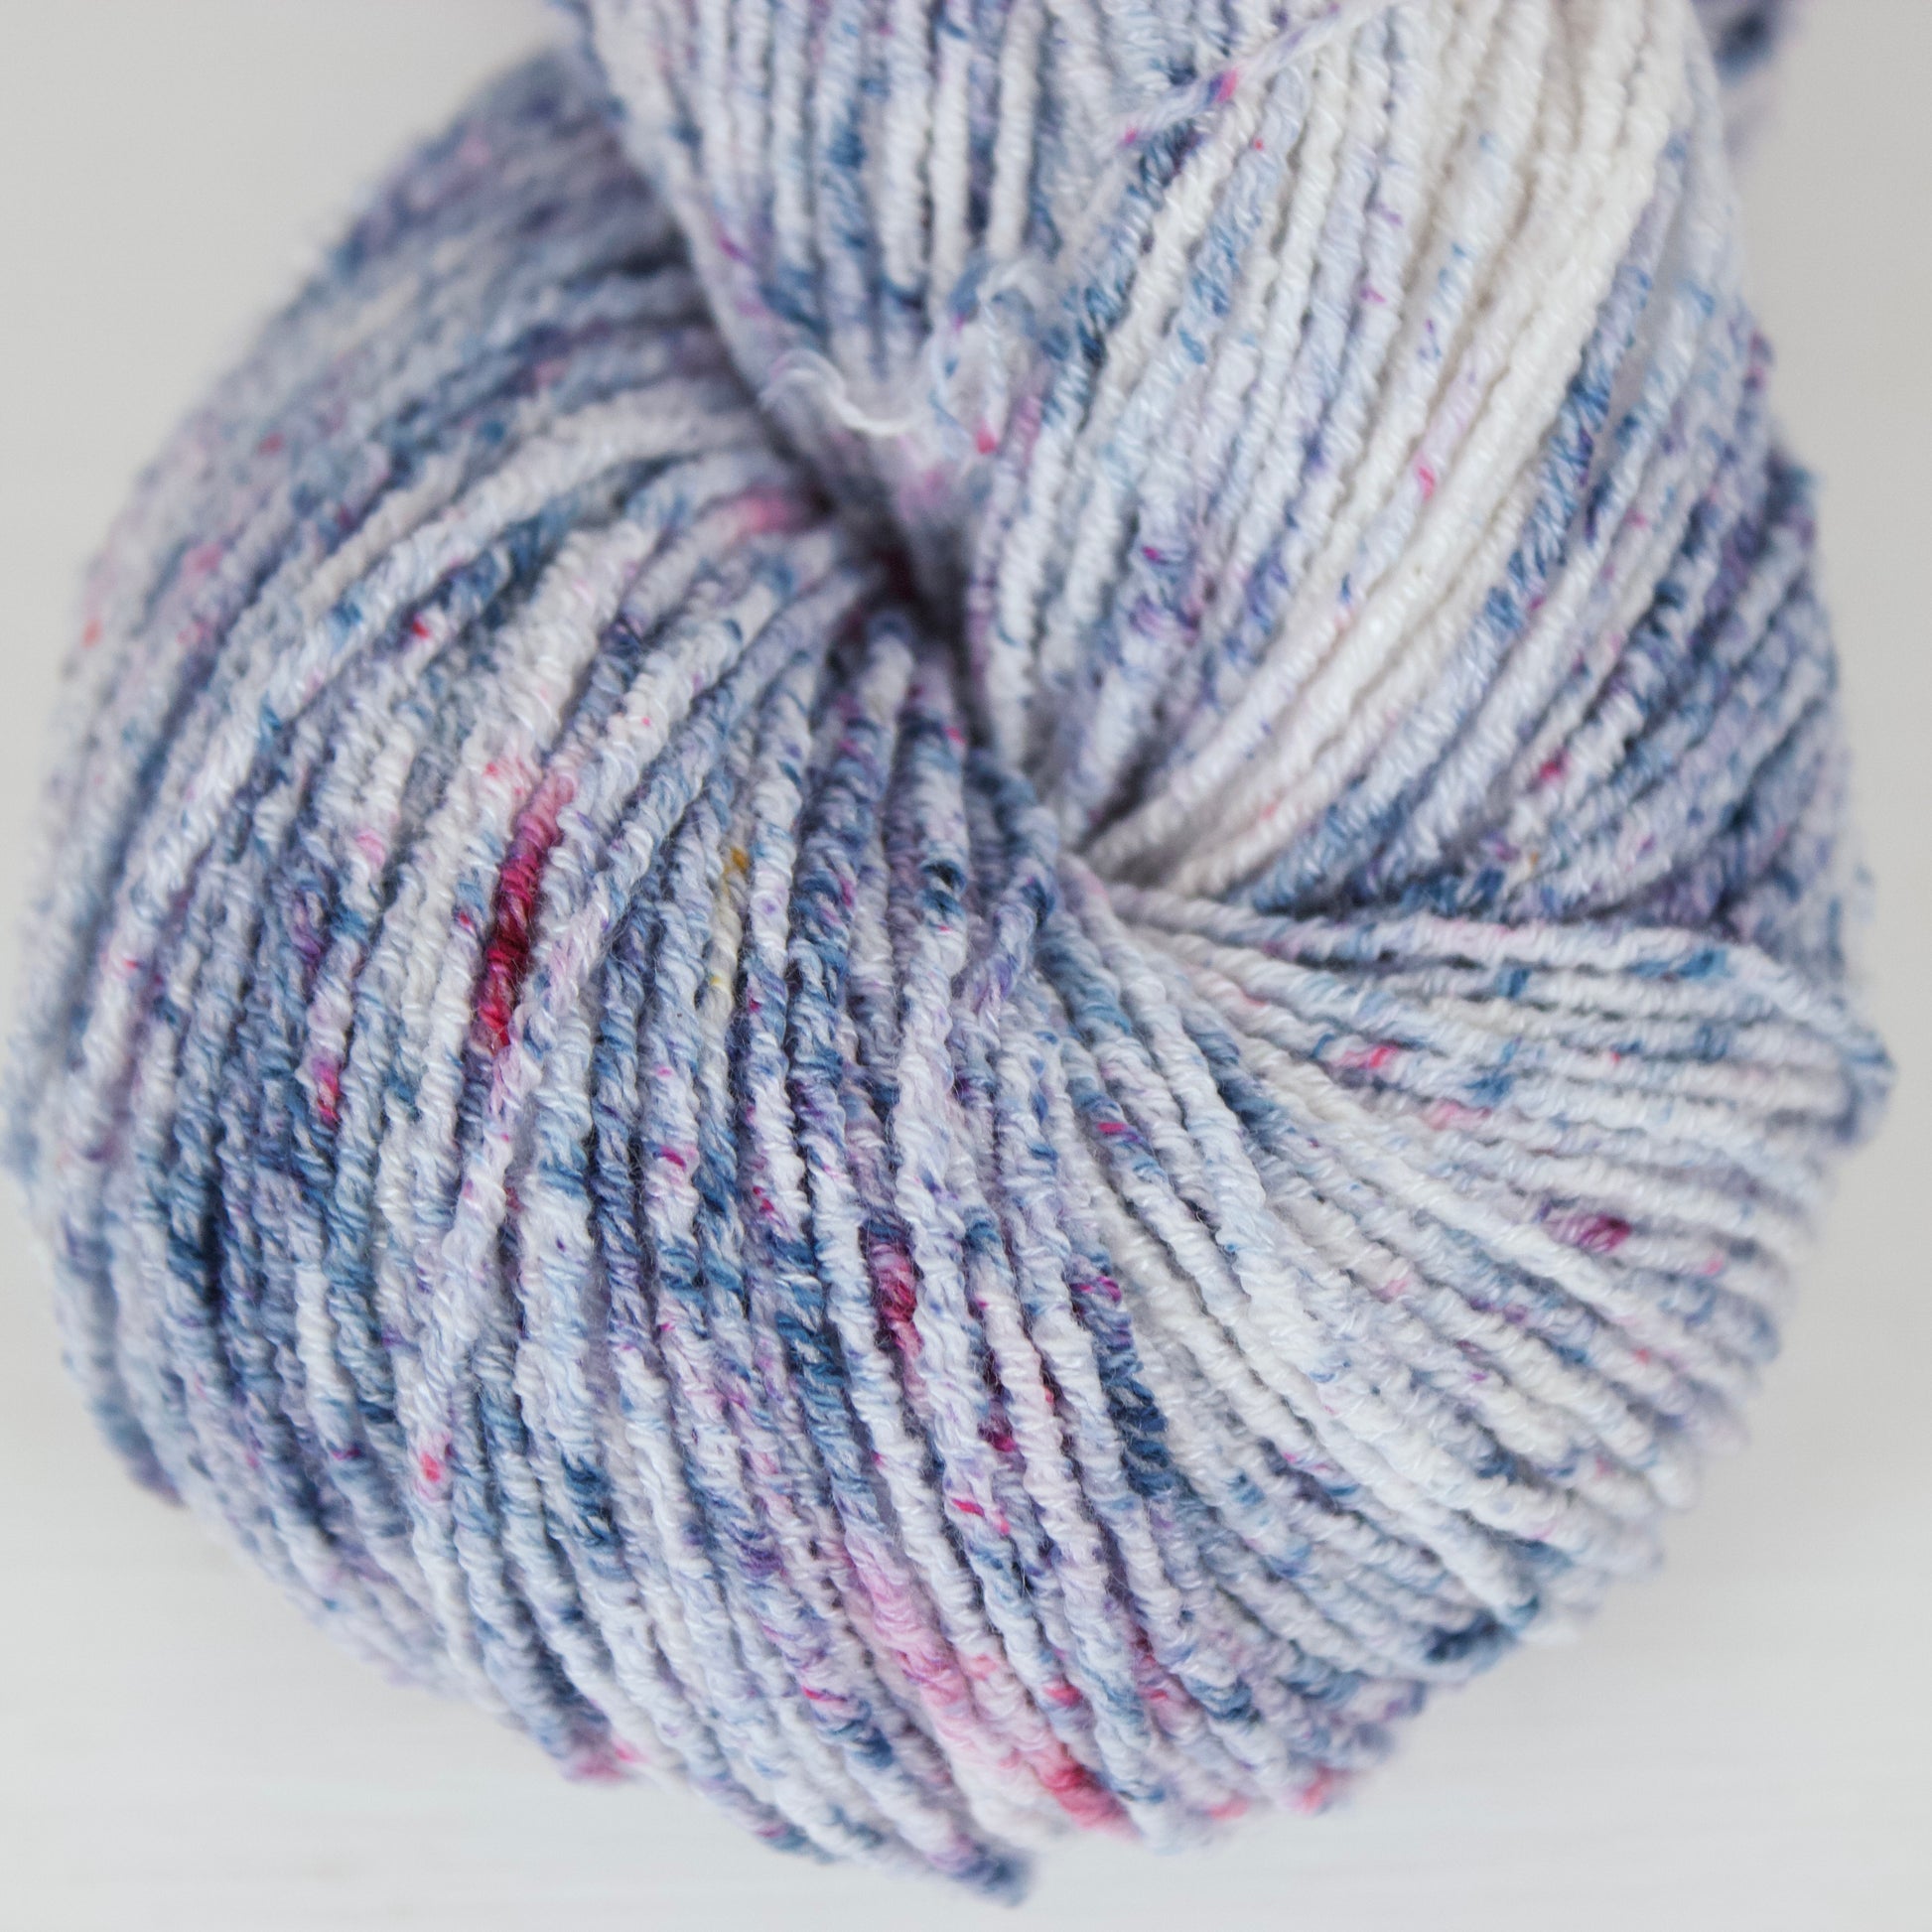 White base yarn with bright indigo and magenta speckles